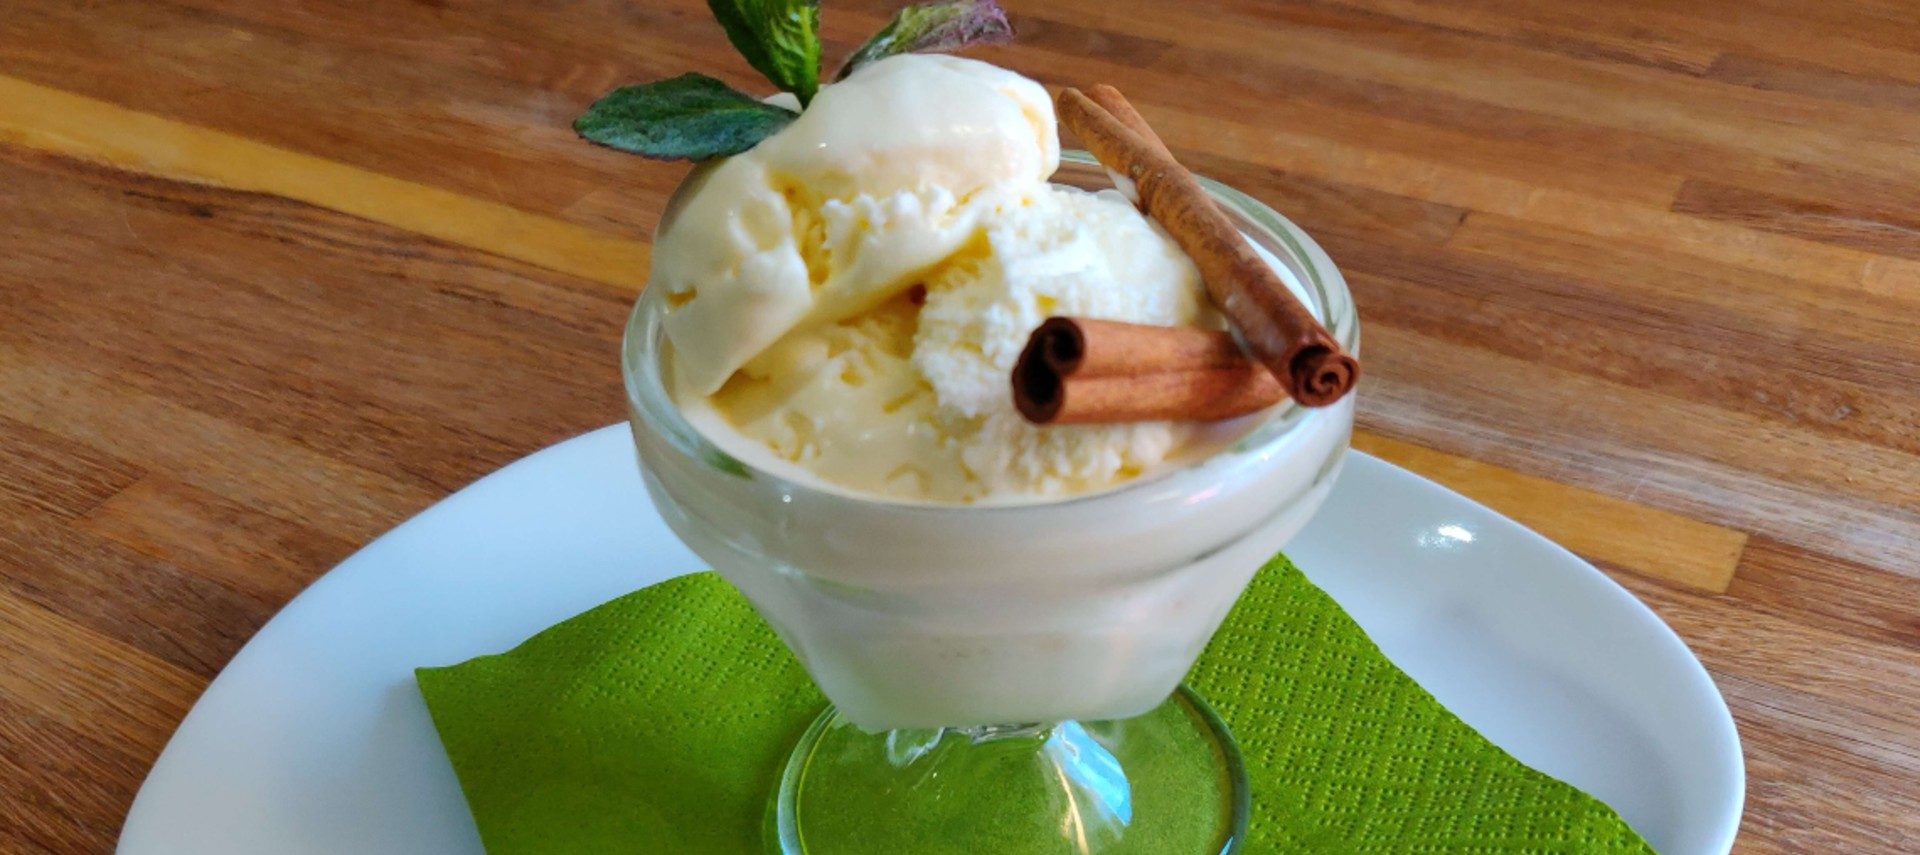 A bowl of ice cream garnished with cinnamon sticks and mint sprigs, on a white plate with a green napkin.